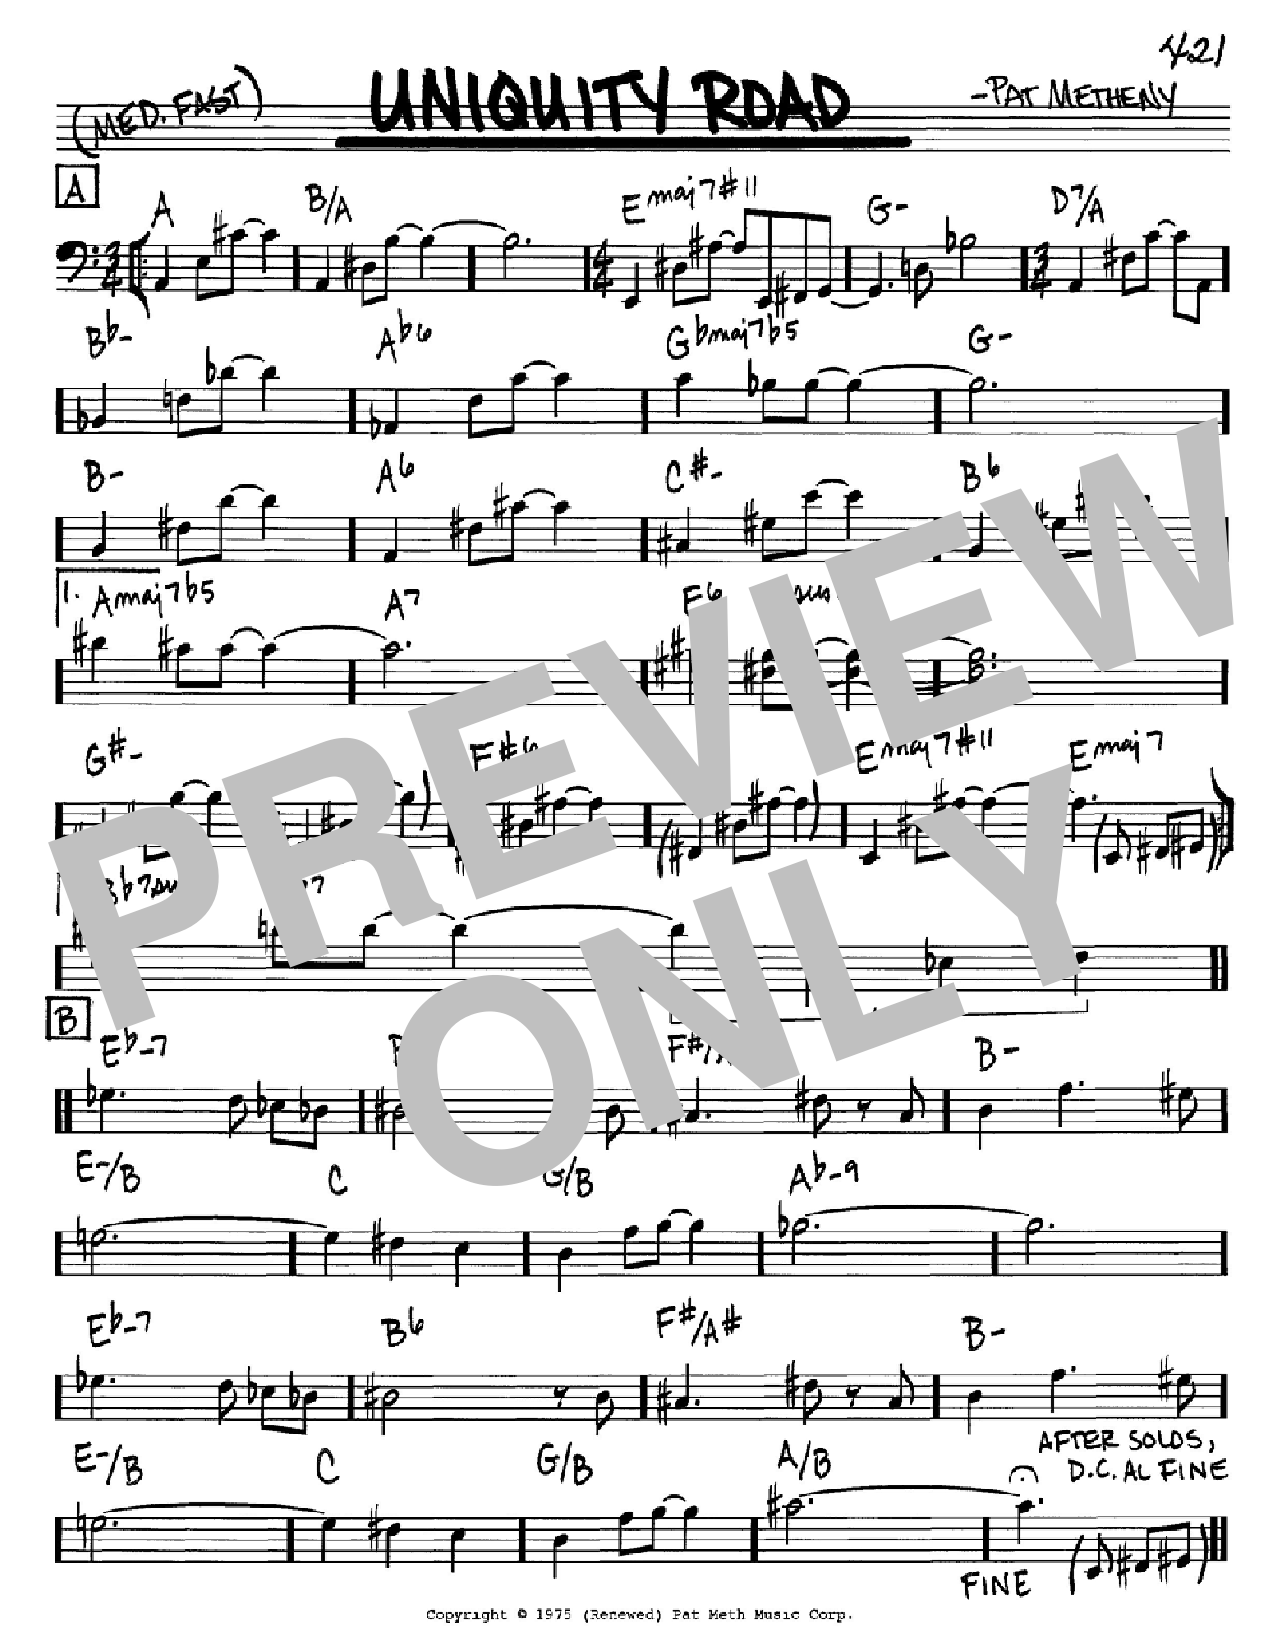 Download Pat Metheny Uniquity Road Sheet Music